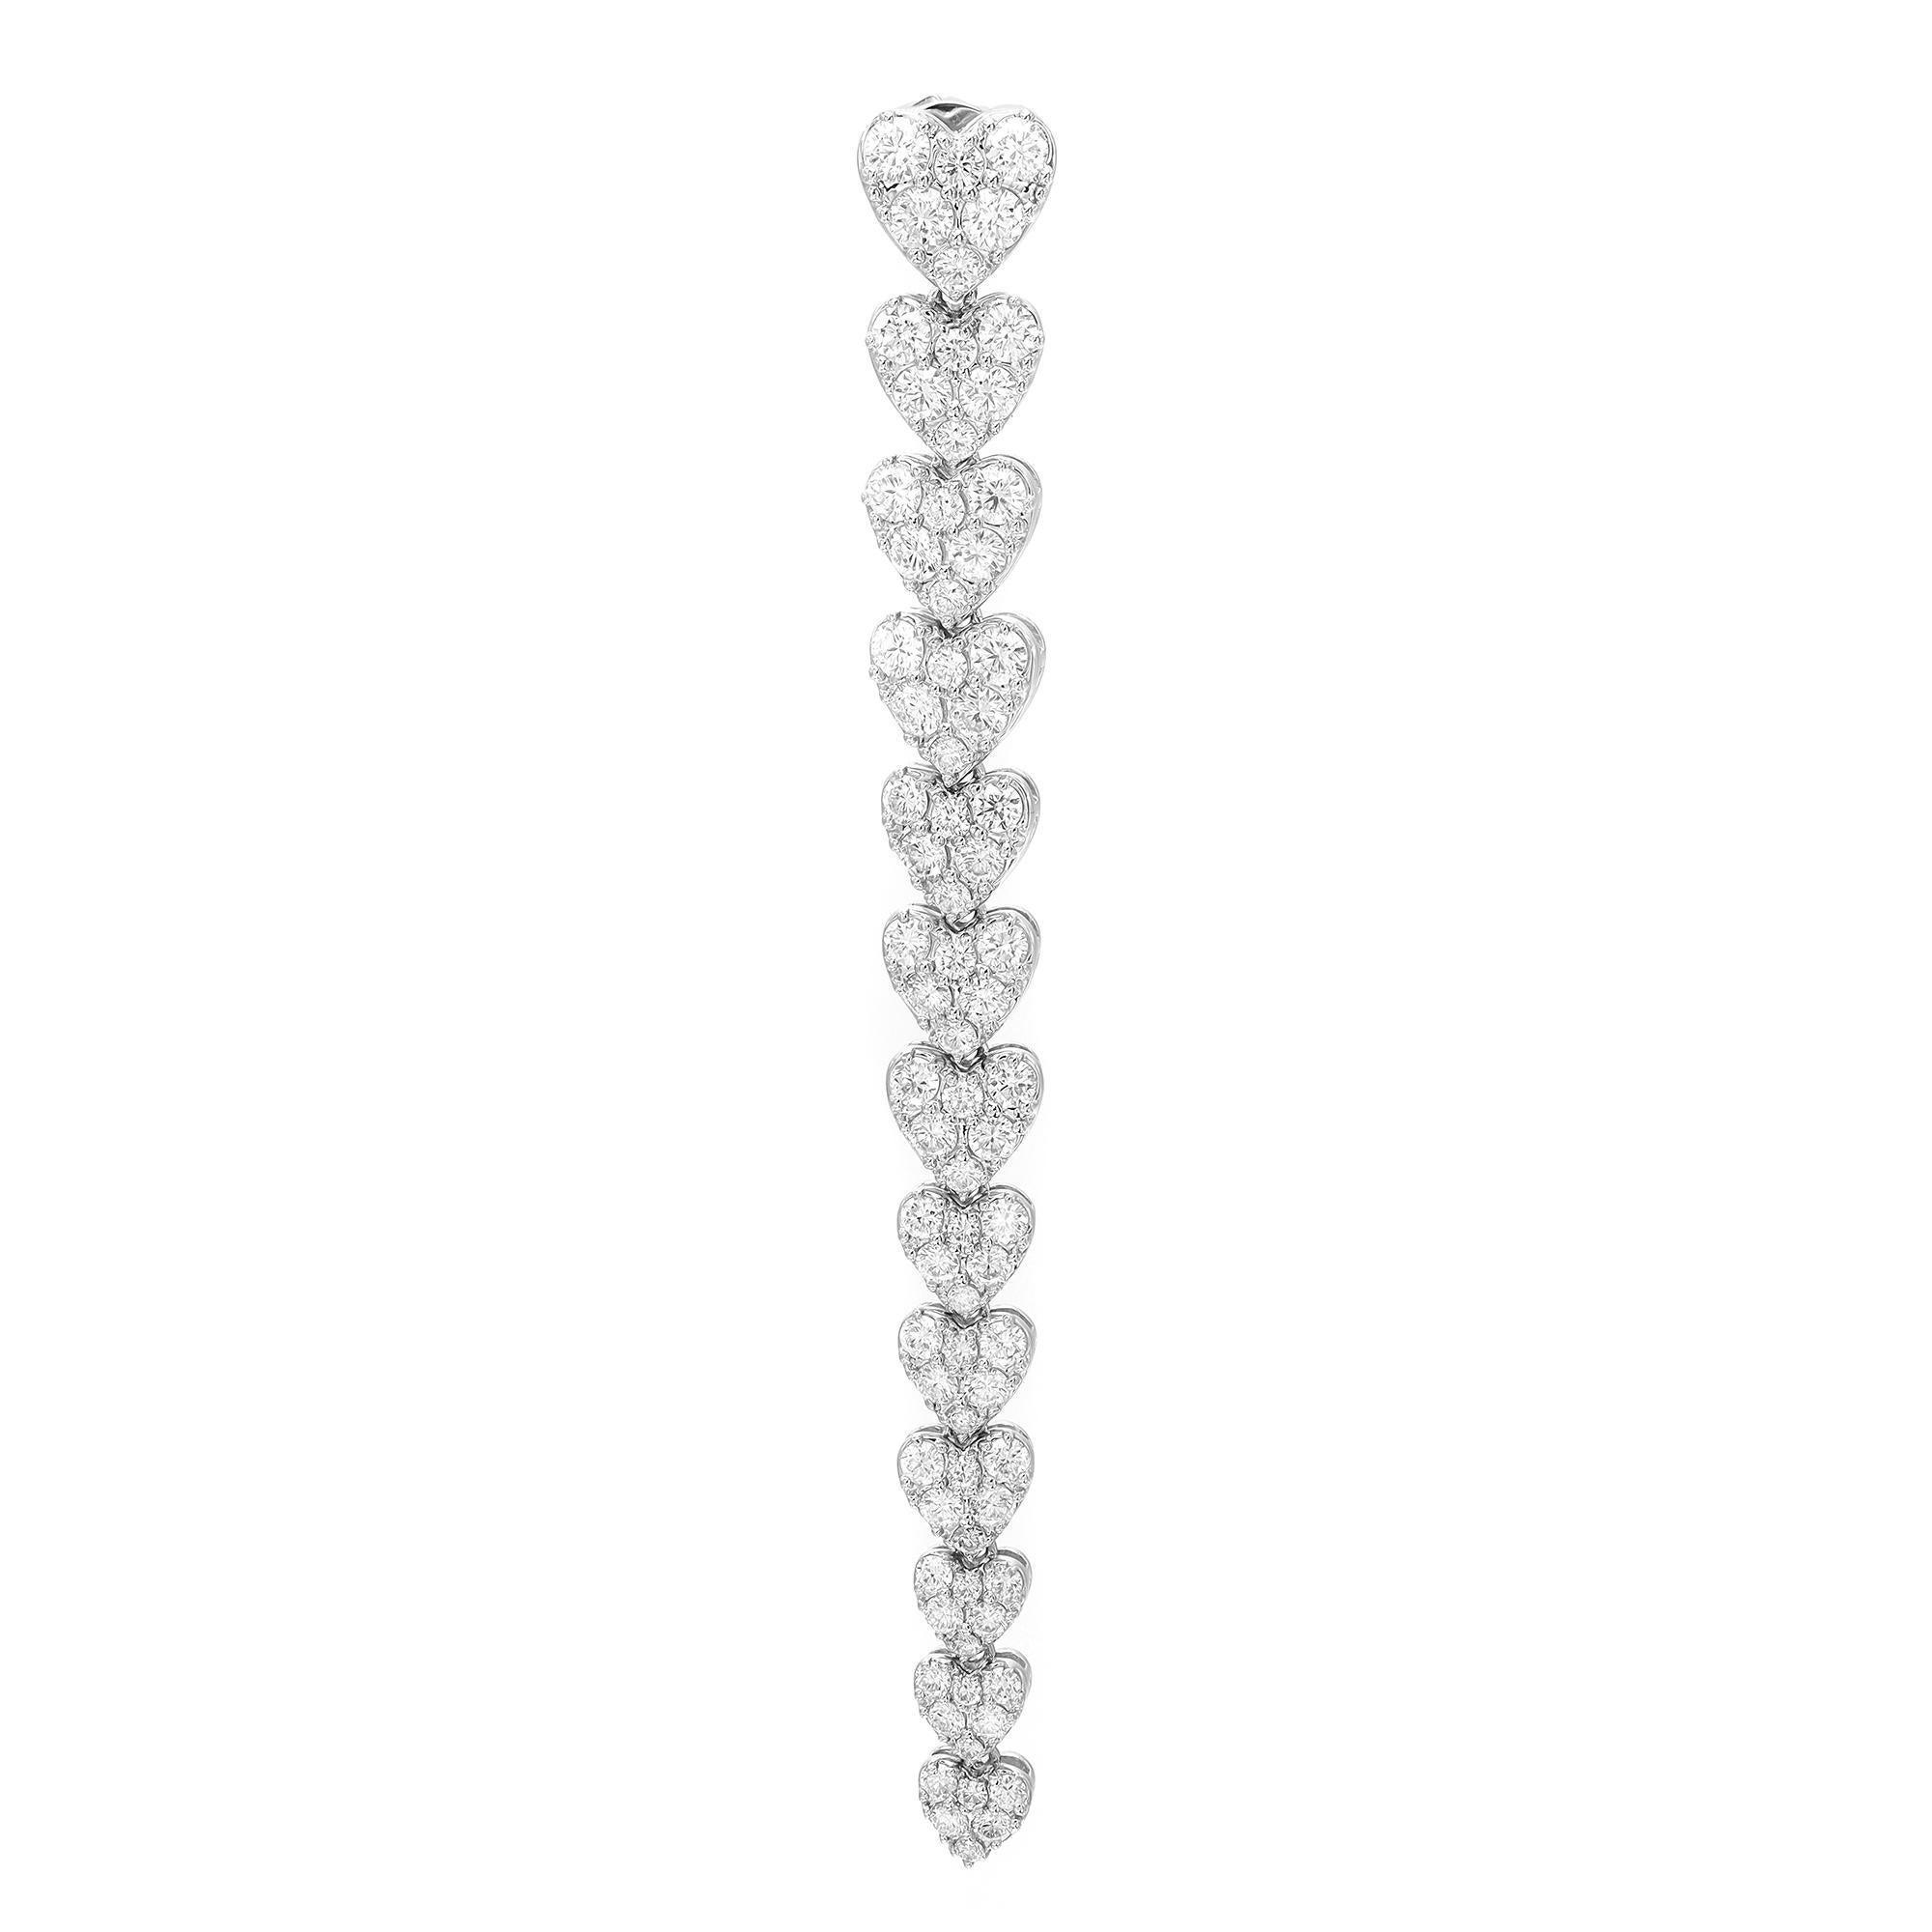 Round Cut Diamond Multiple Love Heart Long Drop Earrings 18K White Gold 4.09Cttw In New Condition For Sale In New York, NY